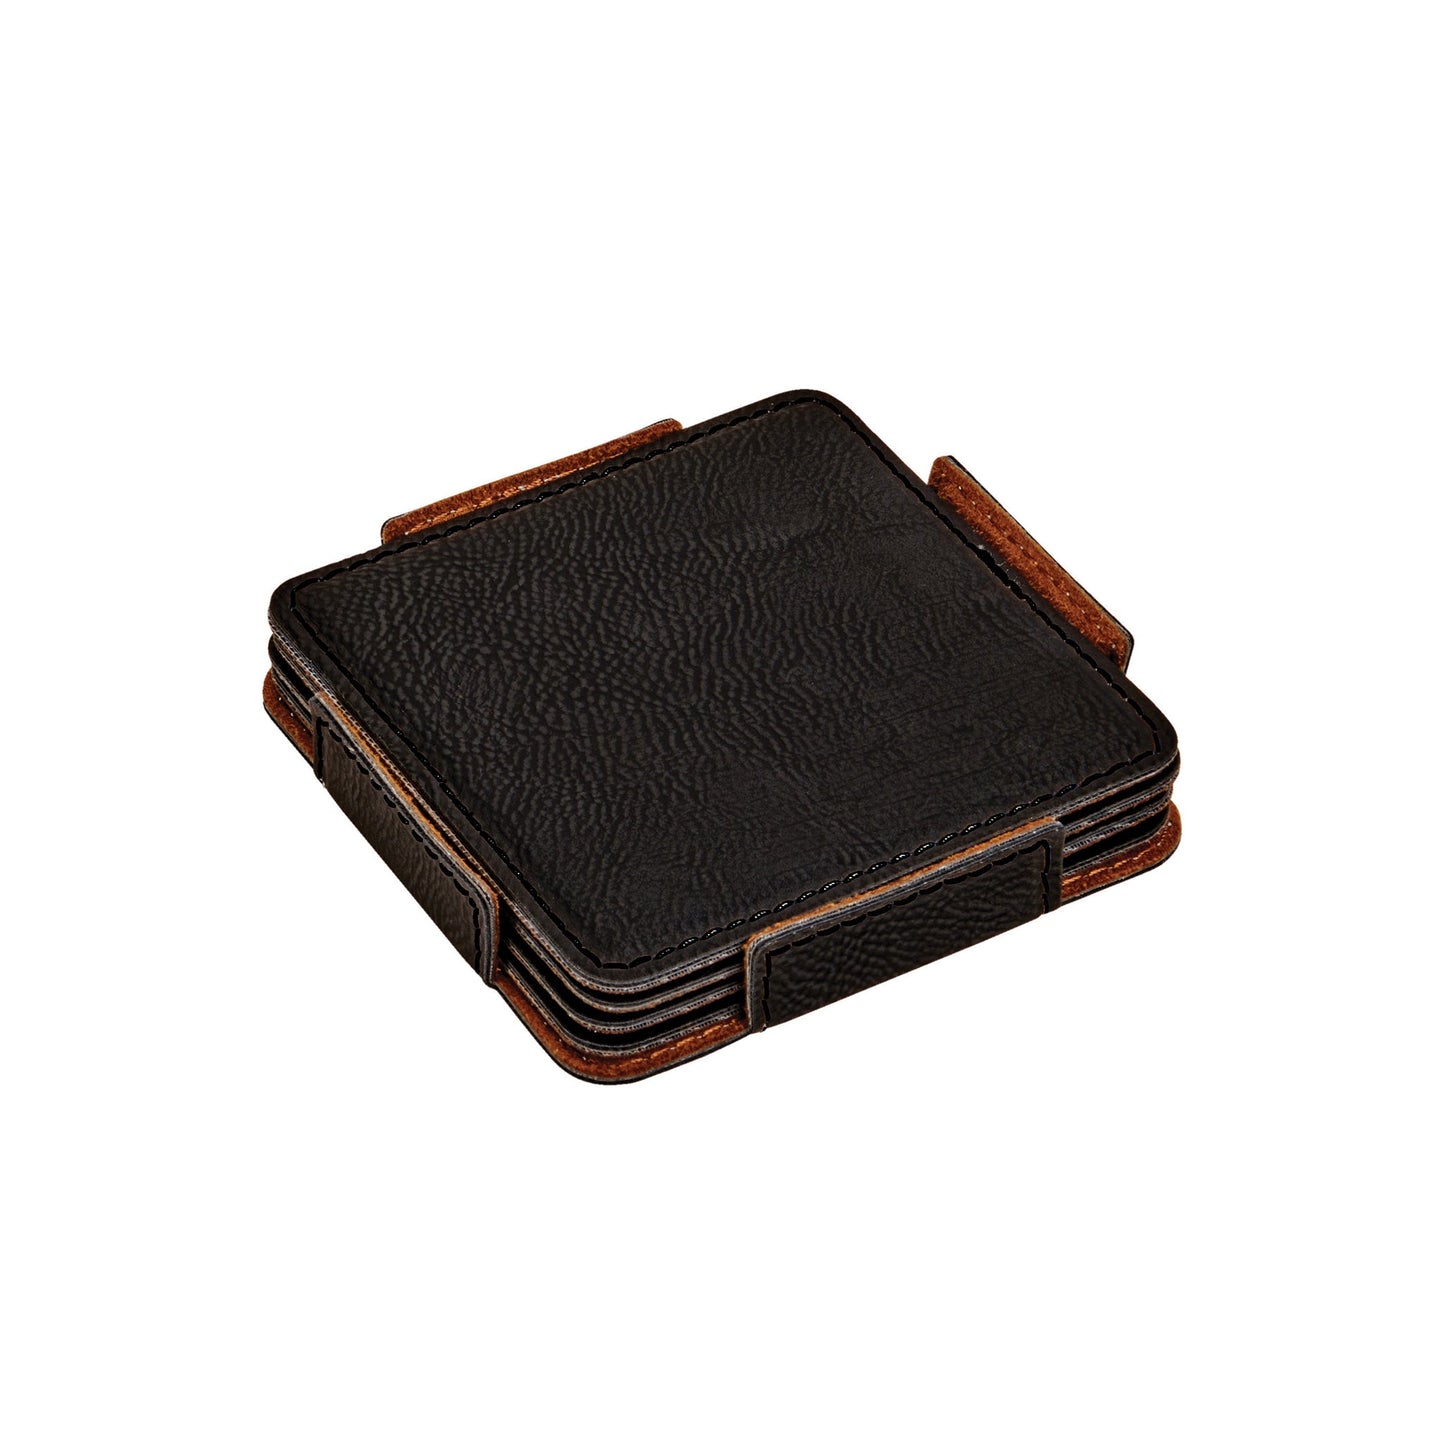 Set Of 4 Leatherette Coasters - Black by Creative Gifts